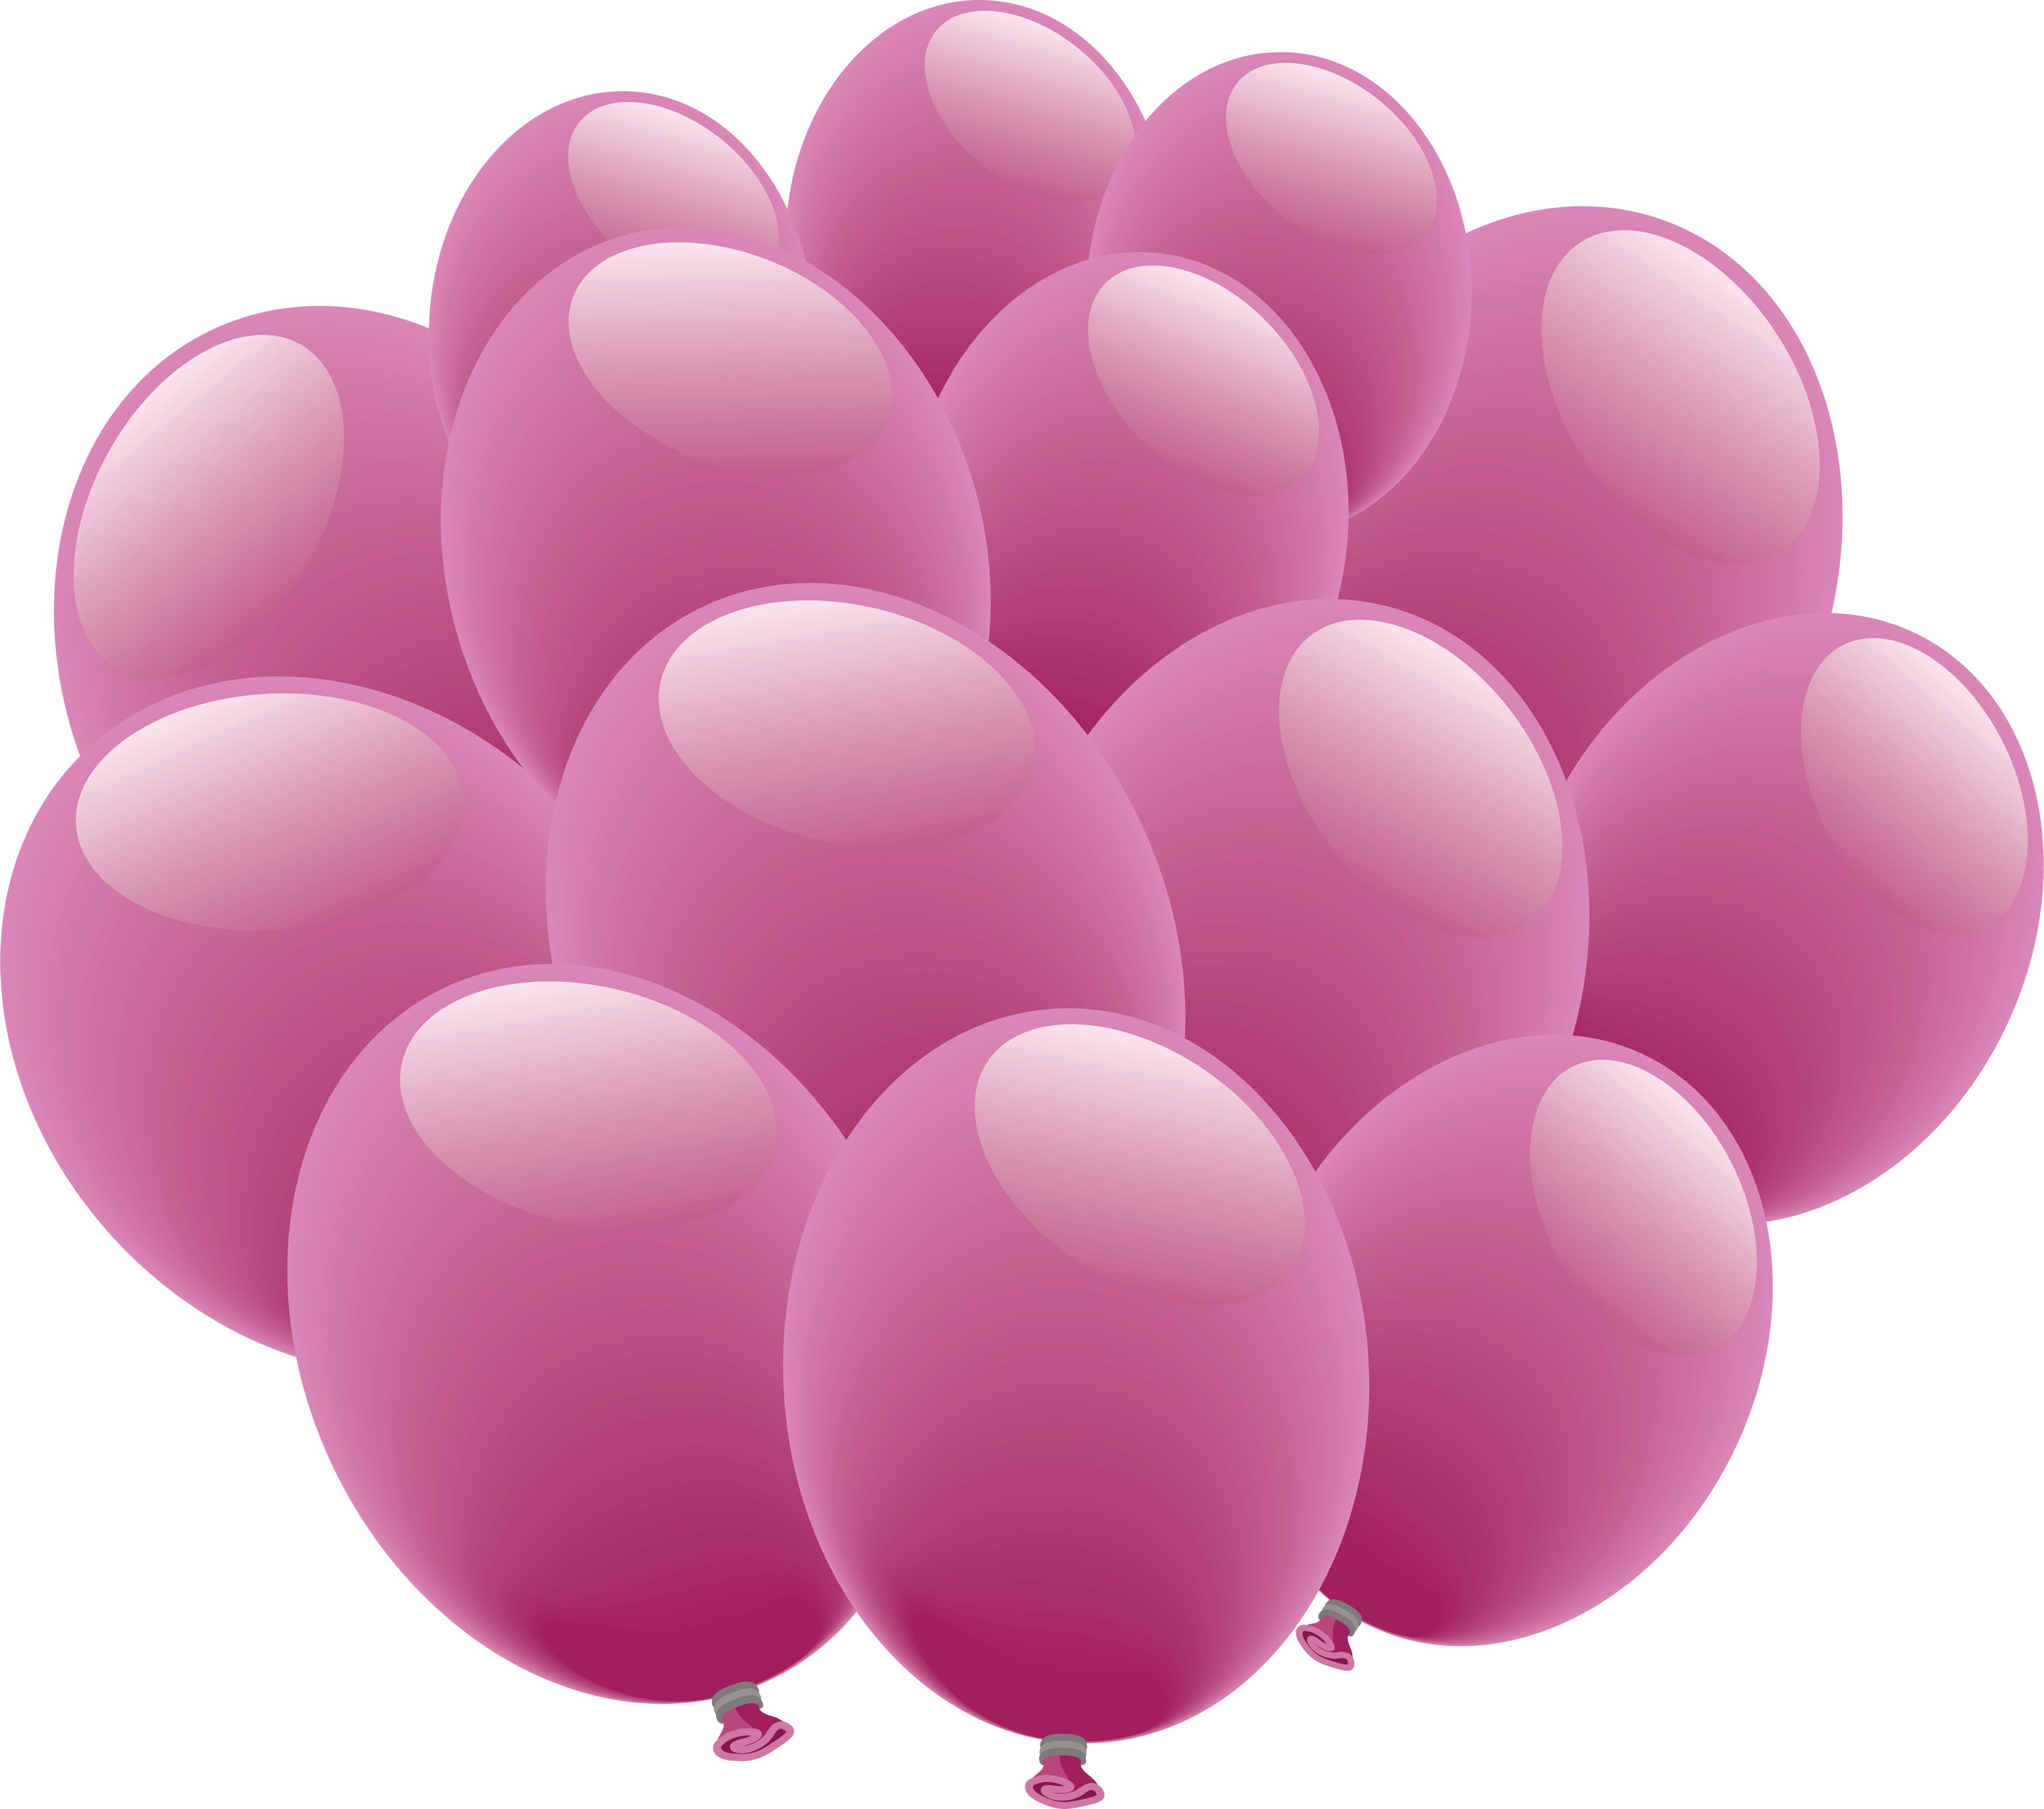 Purple Balloons Png Image PNG Image